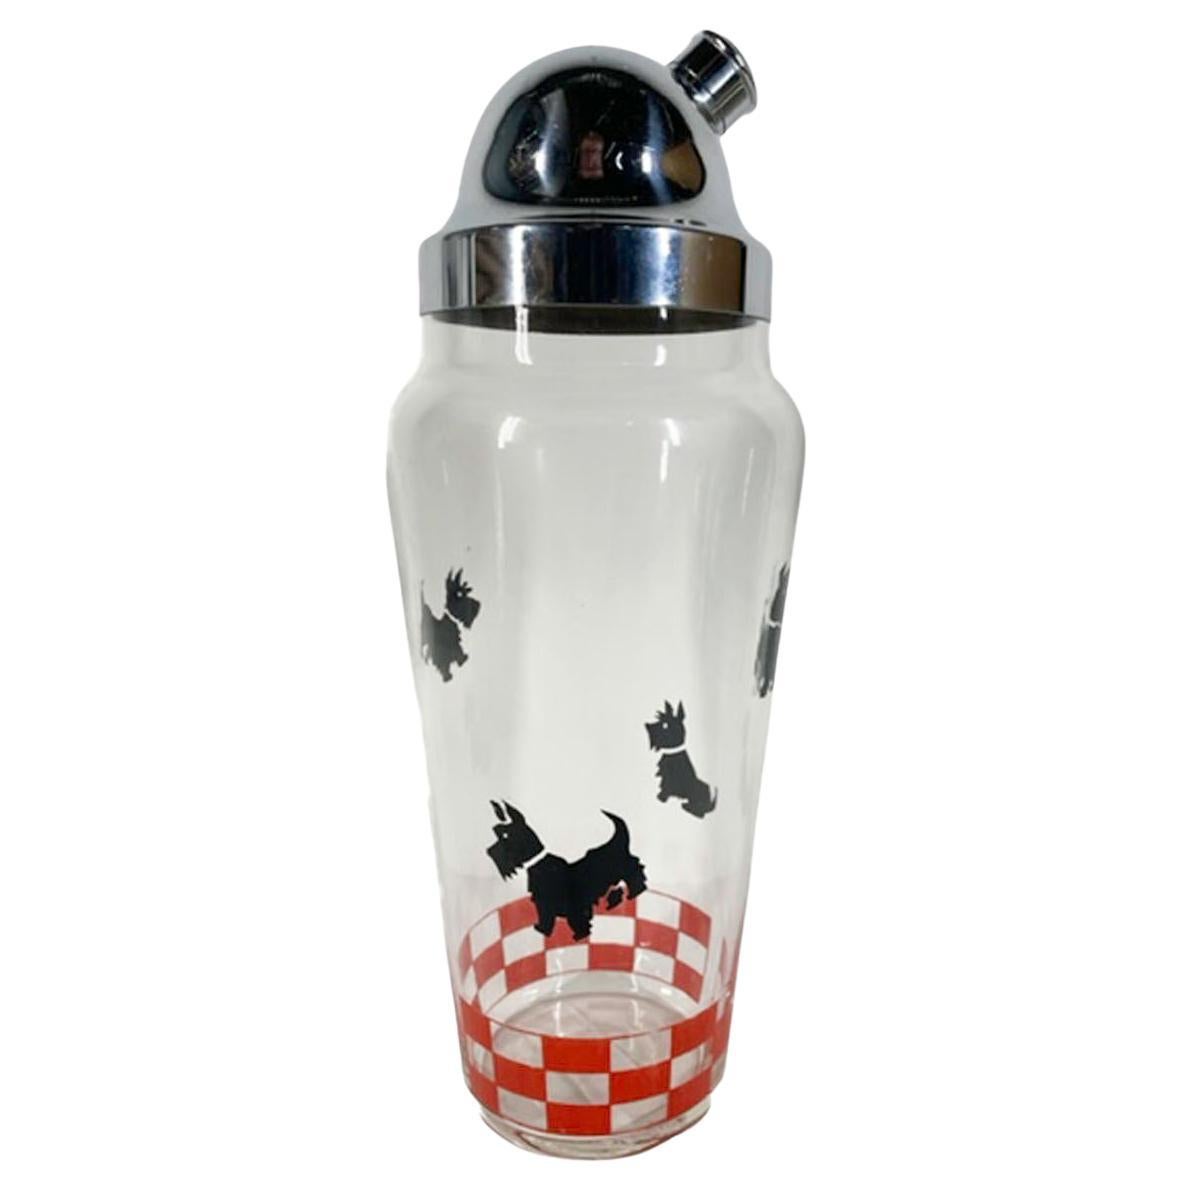 Art Deco, Hazel Atlas Cocktail Shaker with Black Scotties and Red Check Band